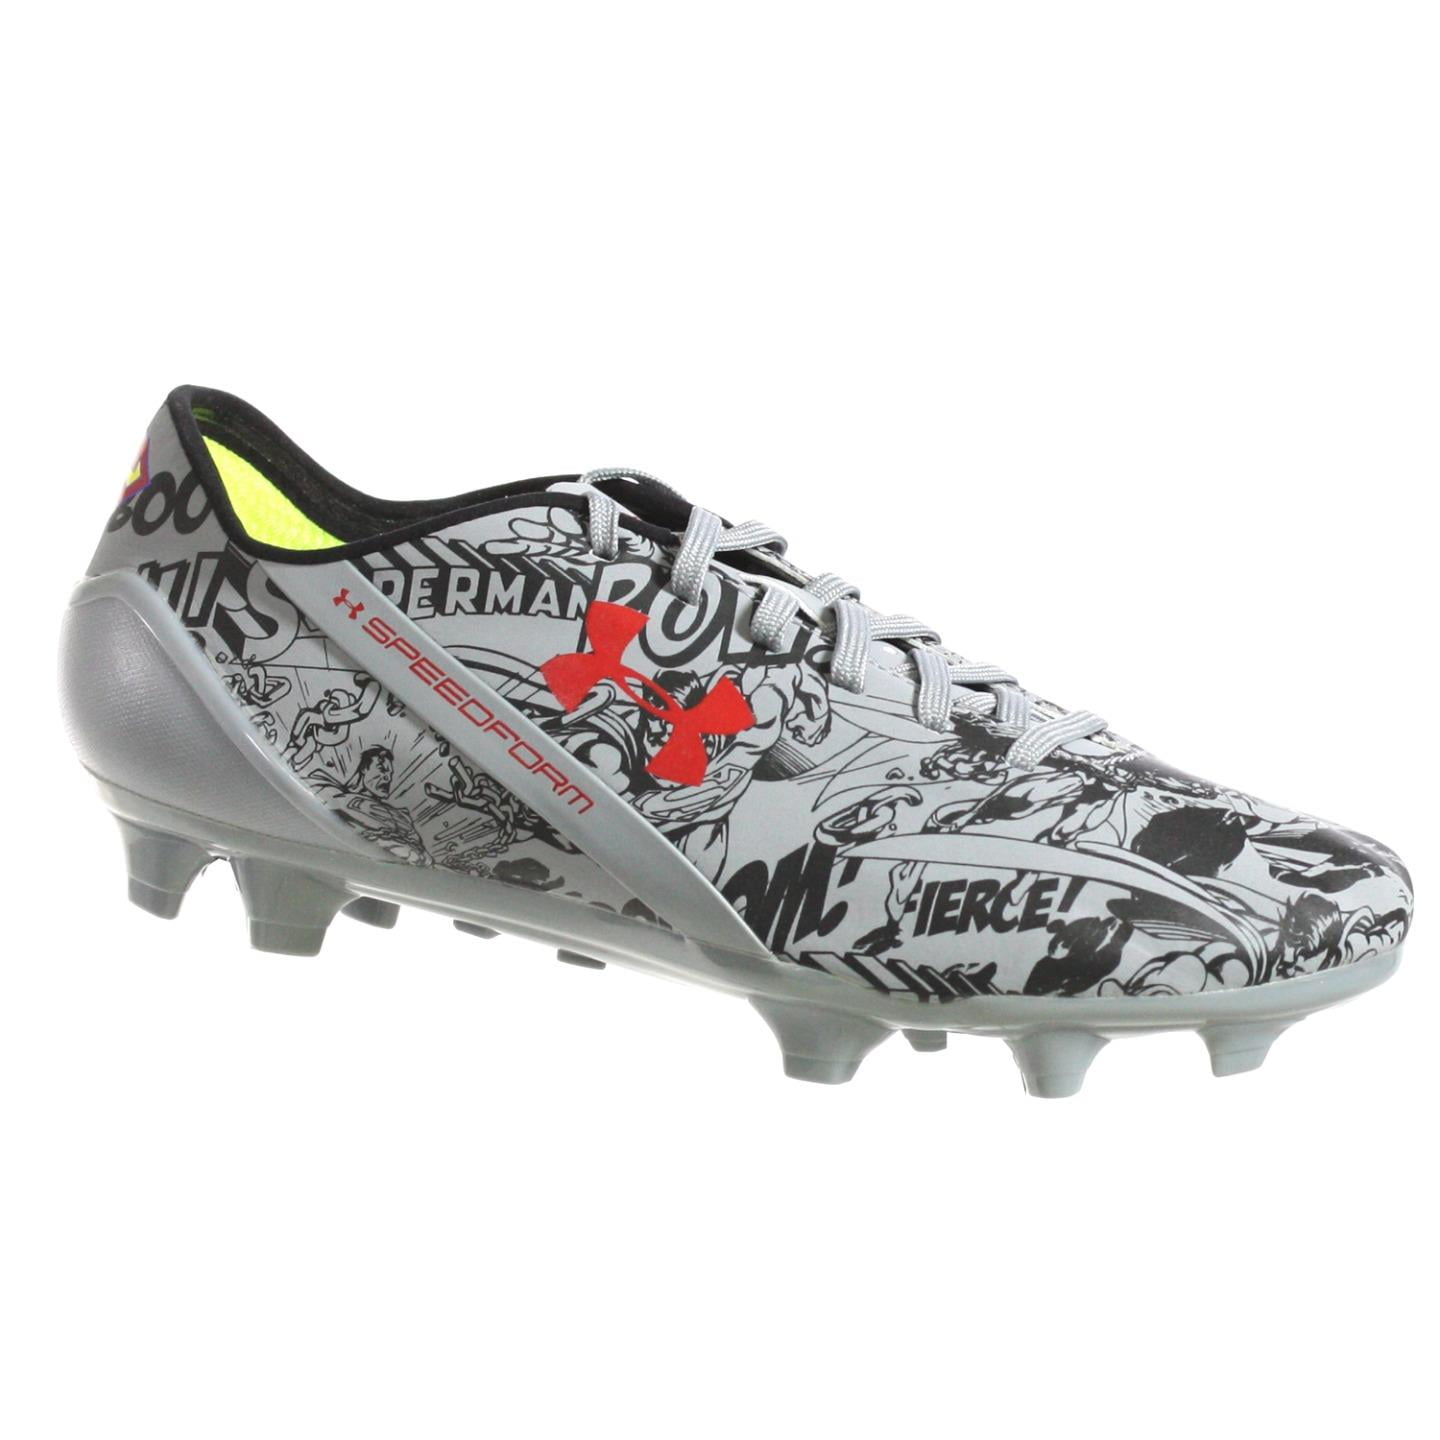 under armor soccer boots